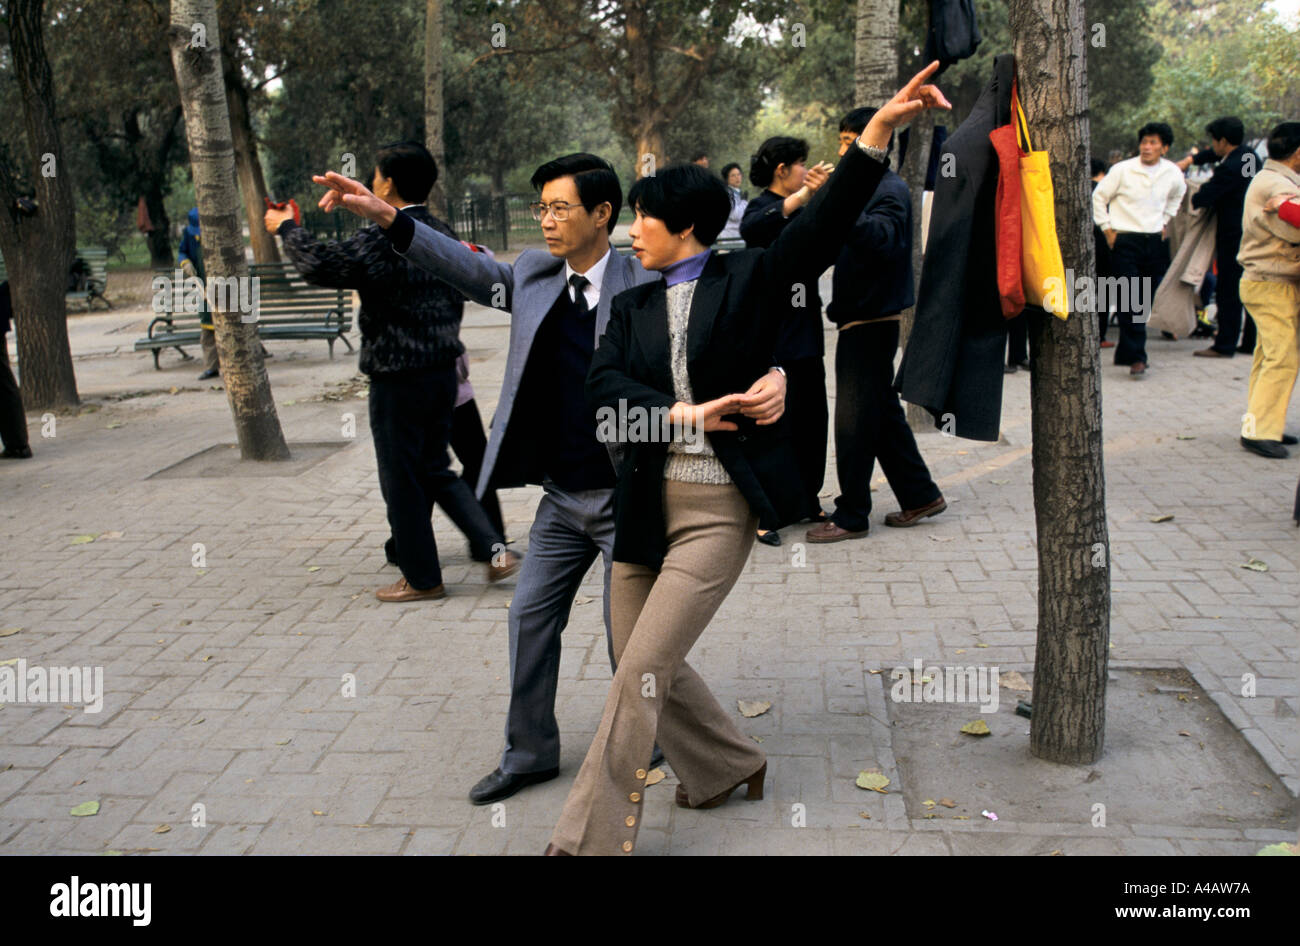 Beijing, China 1997:  a couple takes part in a ballroom dancing class under the trees in Ritan Park before work. Stock Photo